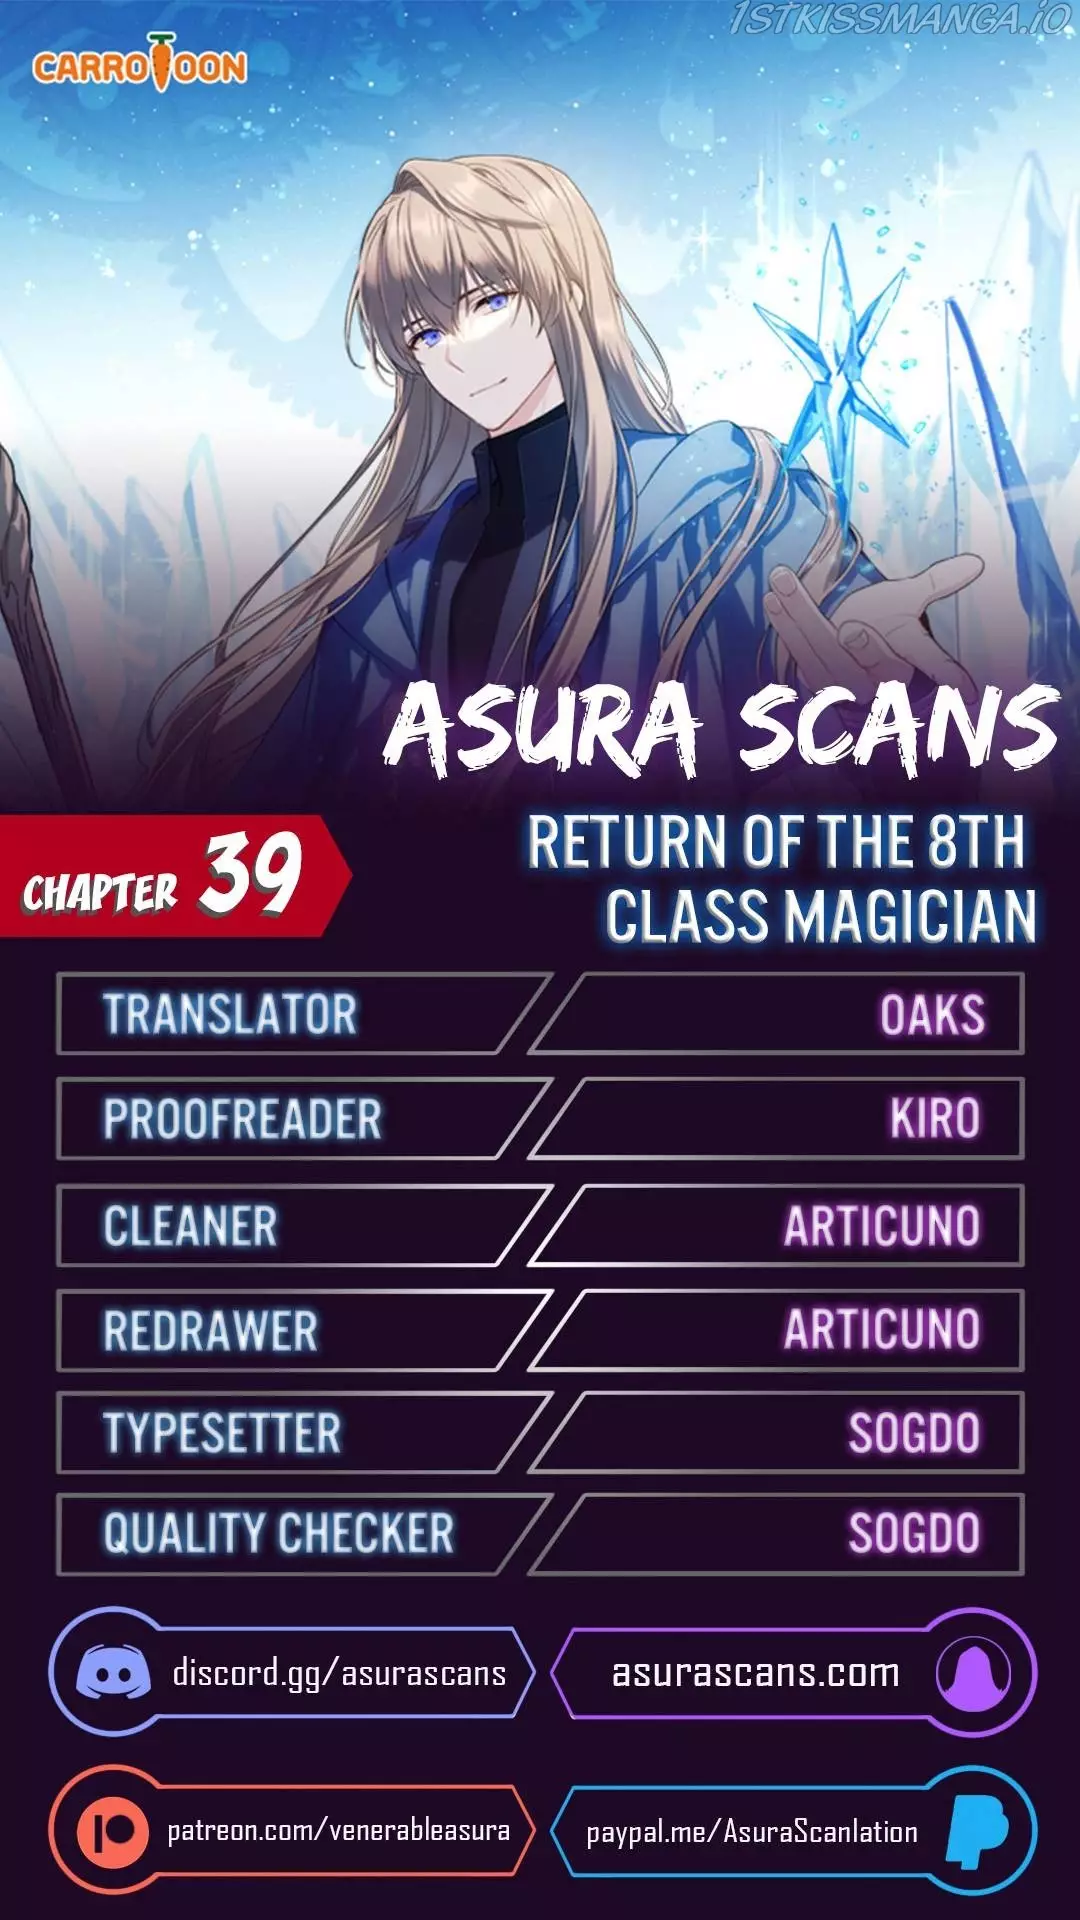 The Return Of The 8Th Class Magician - 39 page 1-9cf7ed62